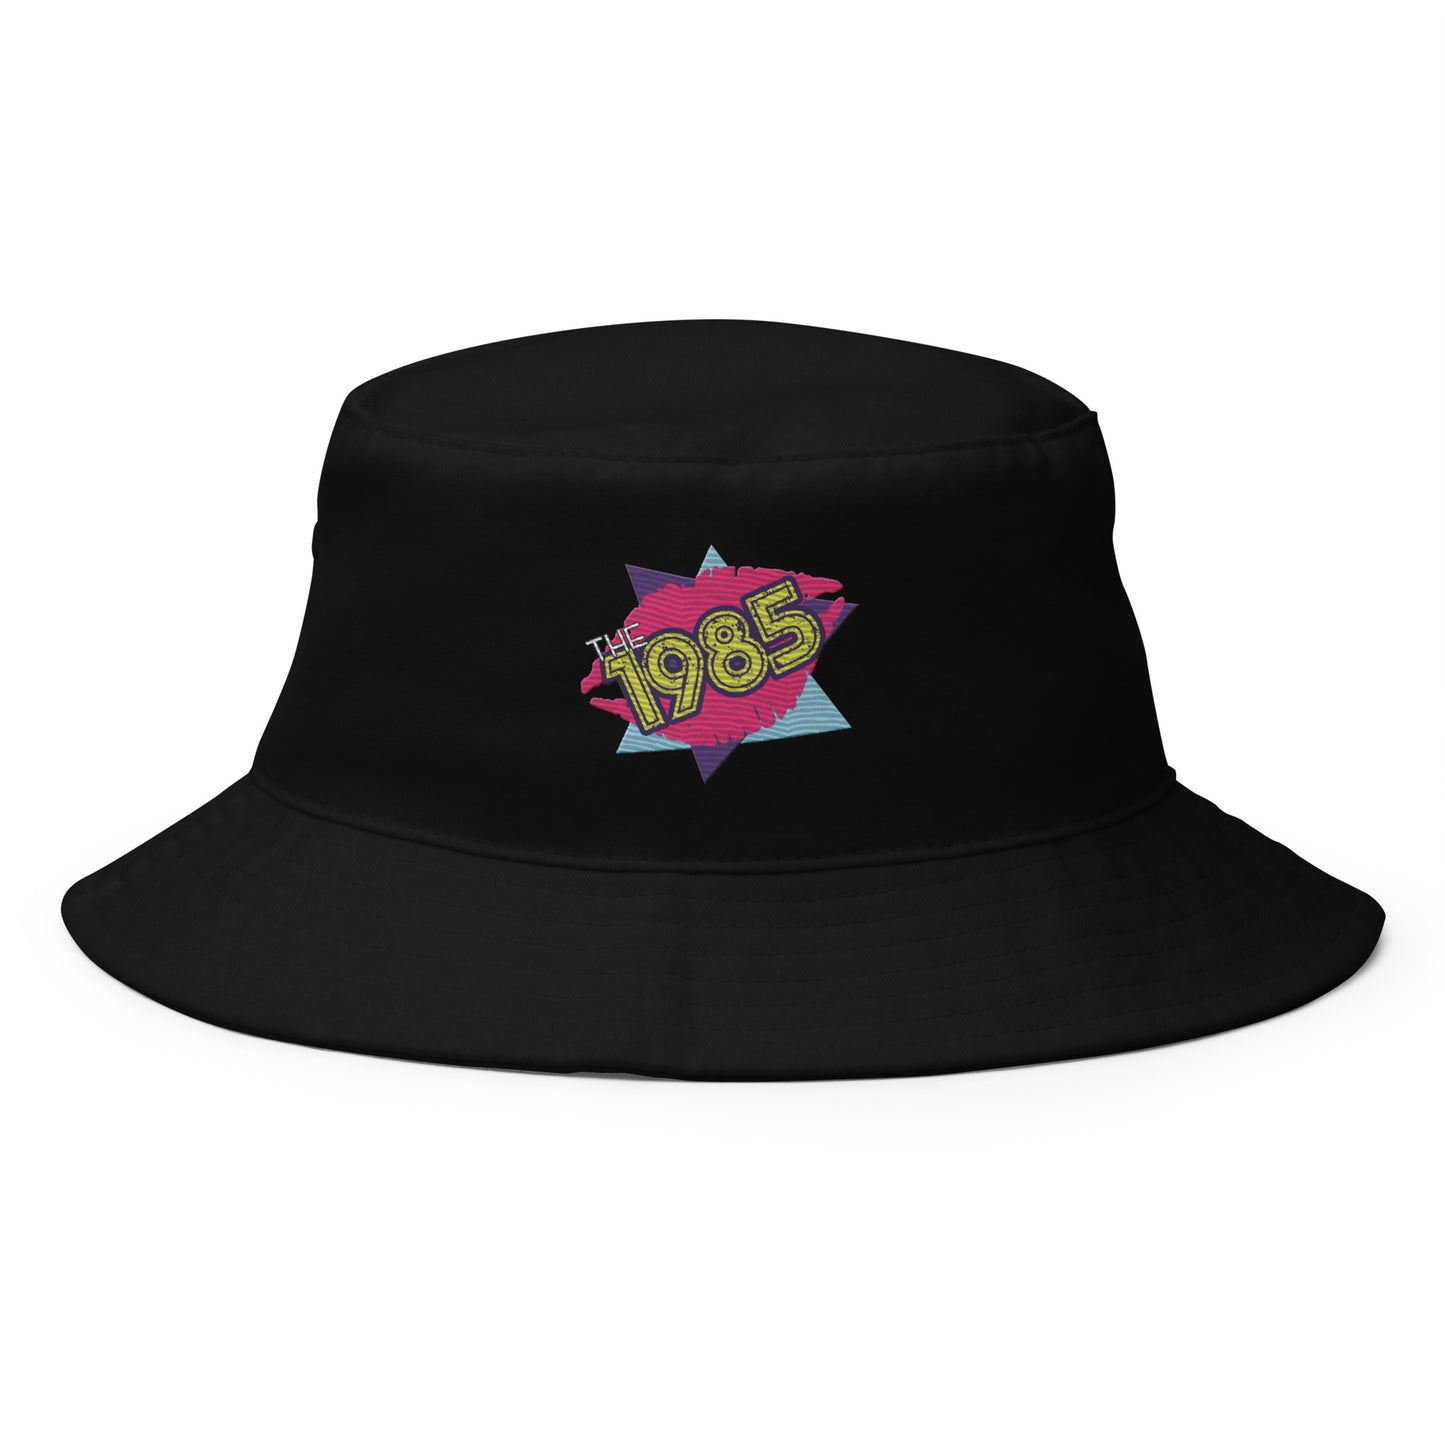 The 1985 Embroidered Logo Bucket Hat